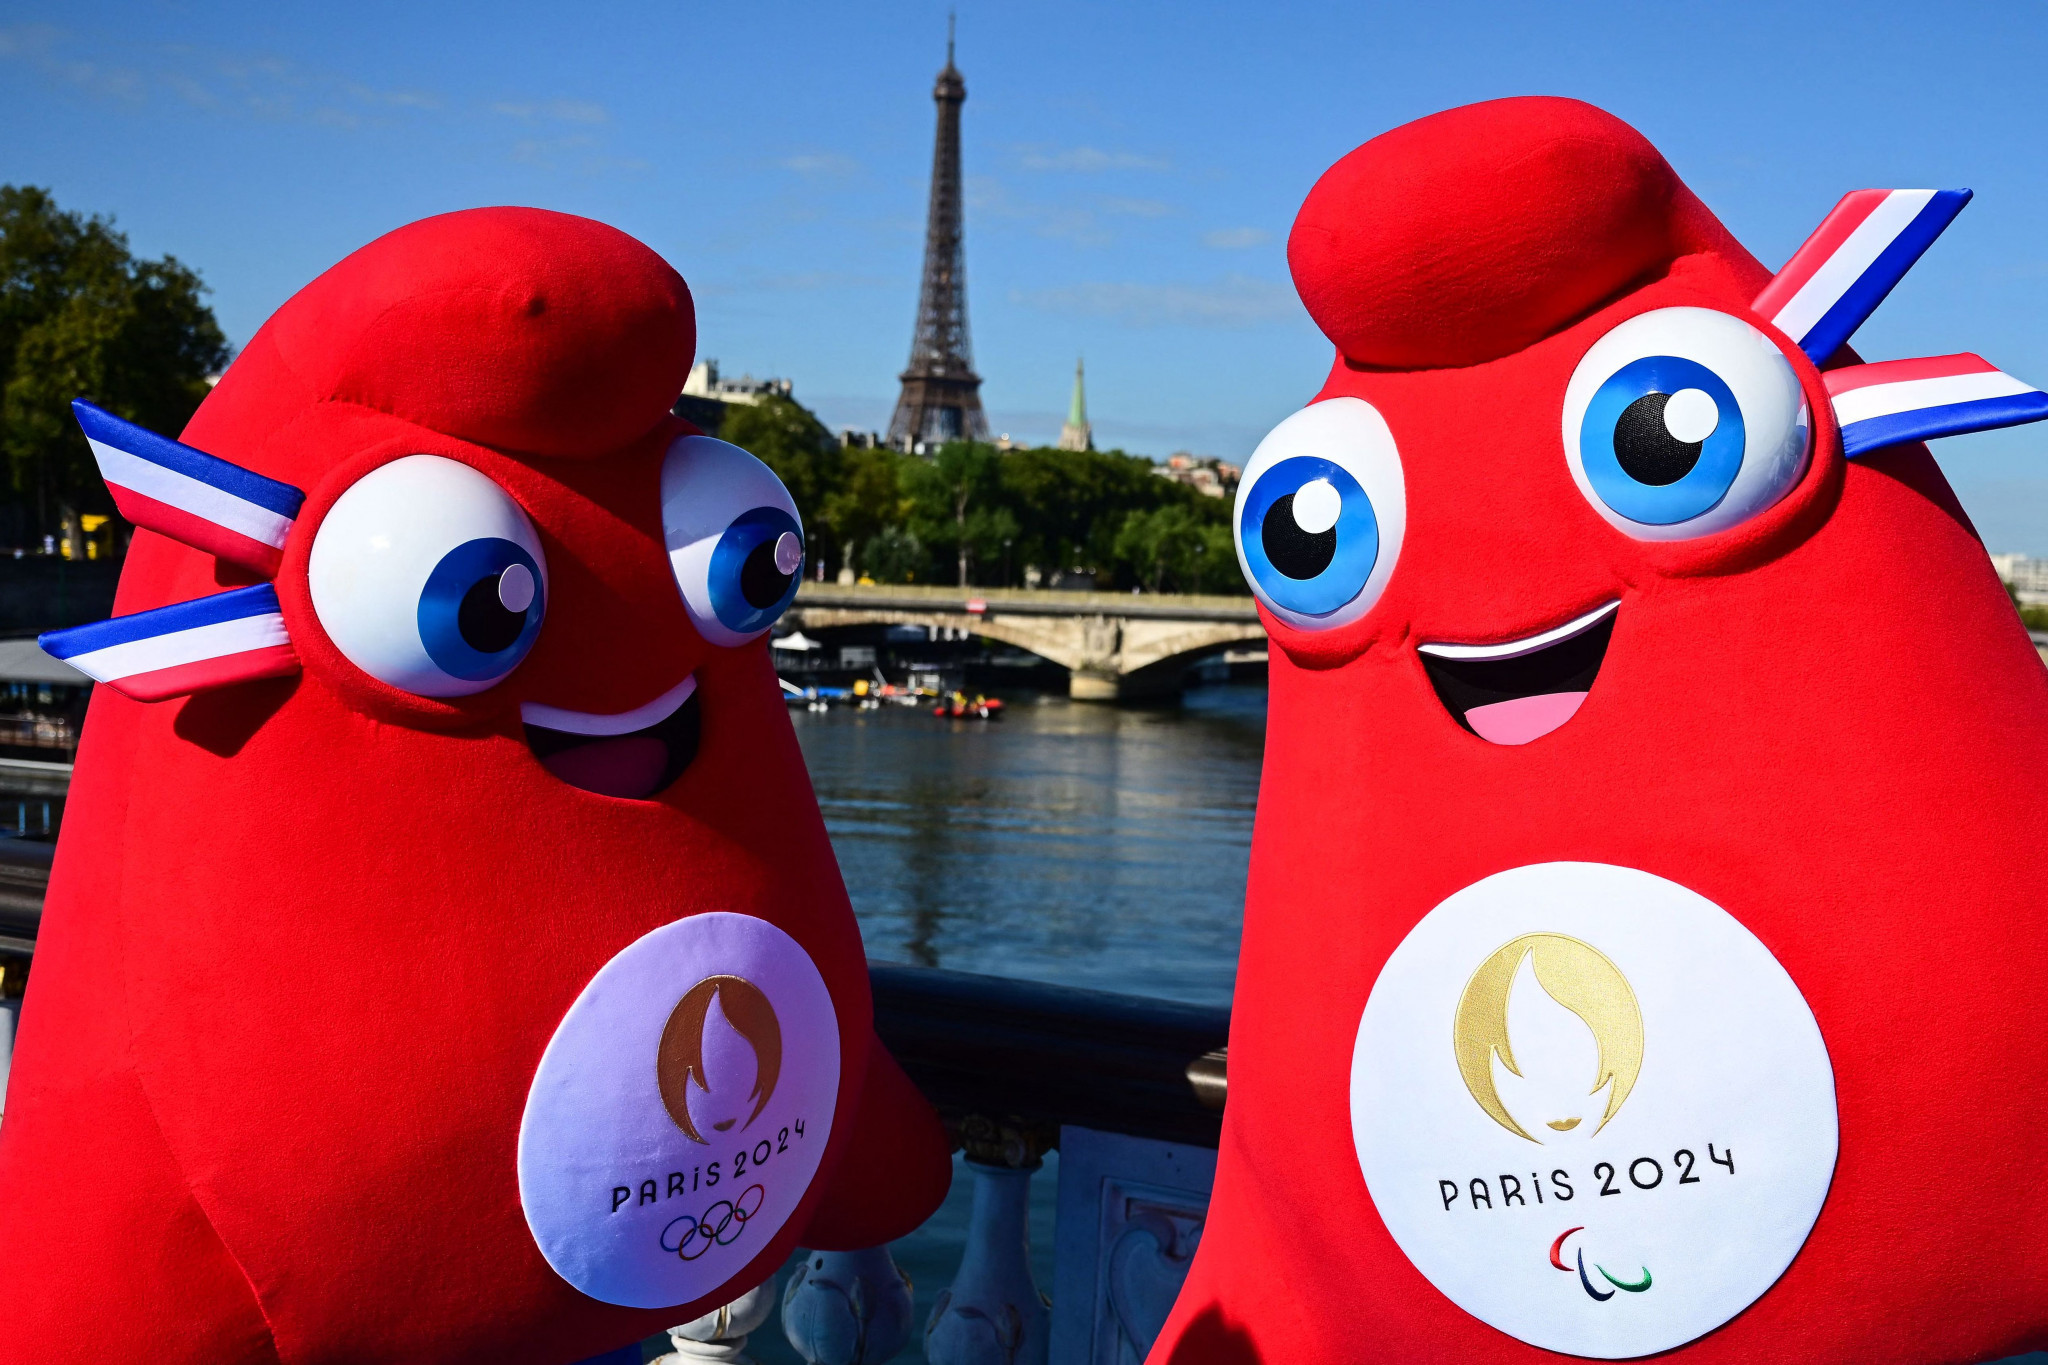 The Report highlights Paris 2024 as the 